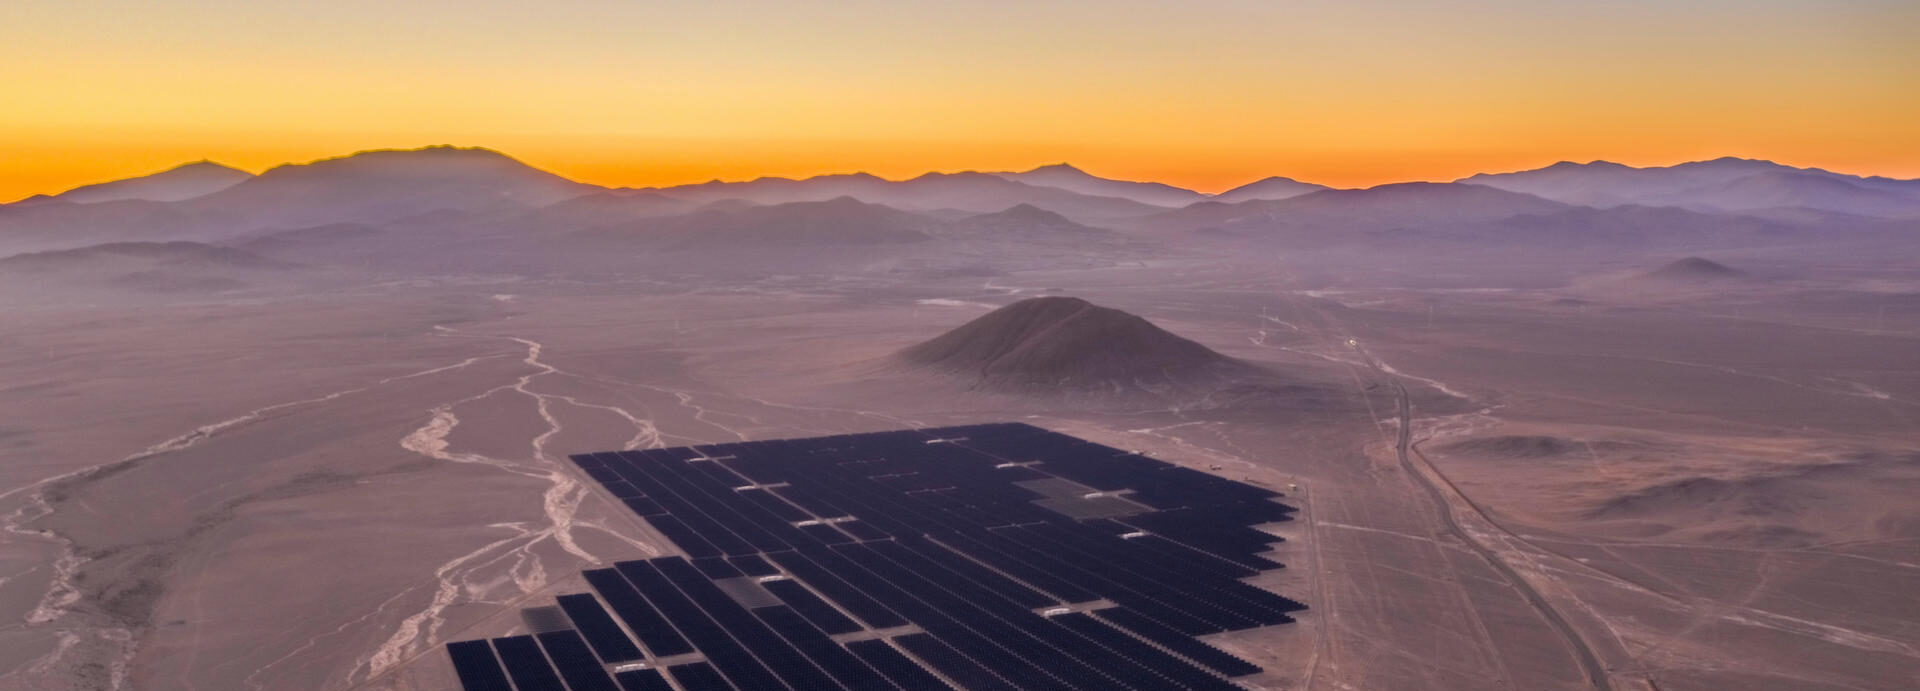 <p>A solar plant in Chile&#8217;s Atacama desert. Chile is one of the Latin American countries leading the transition to zero emissions energy sources (image: Alamy)</p>